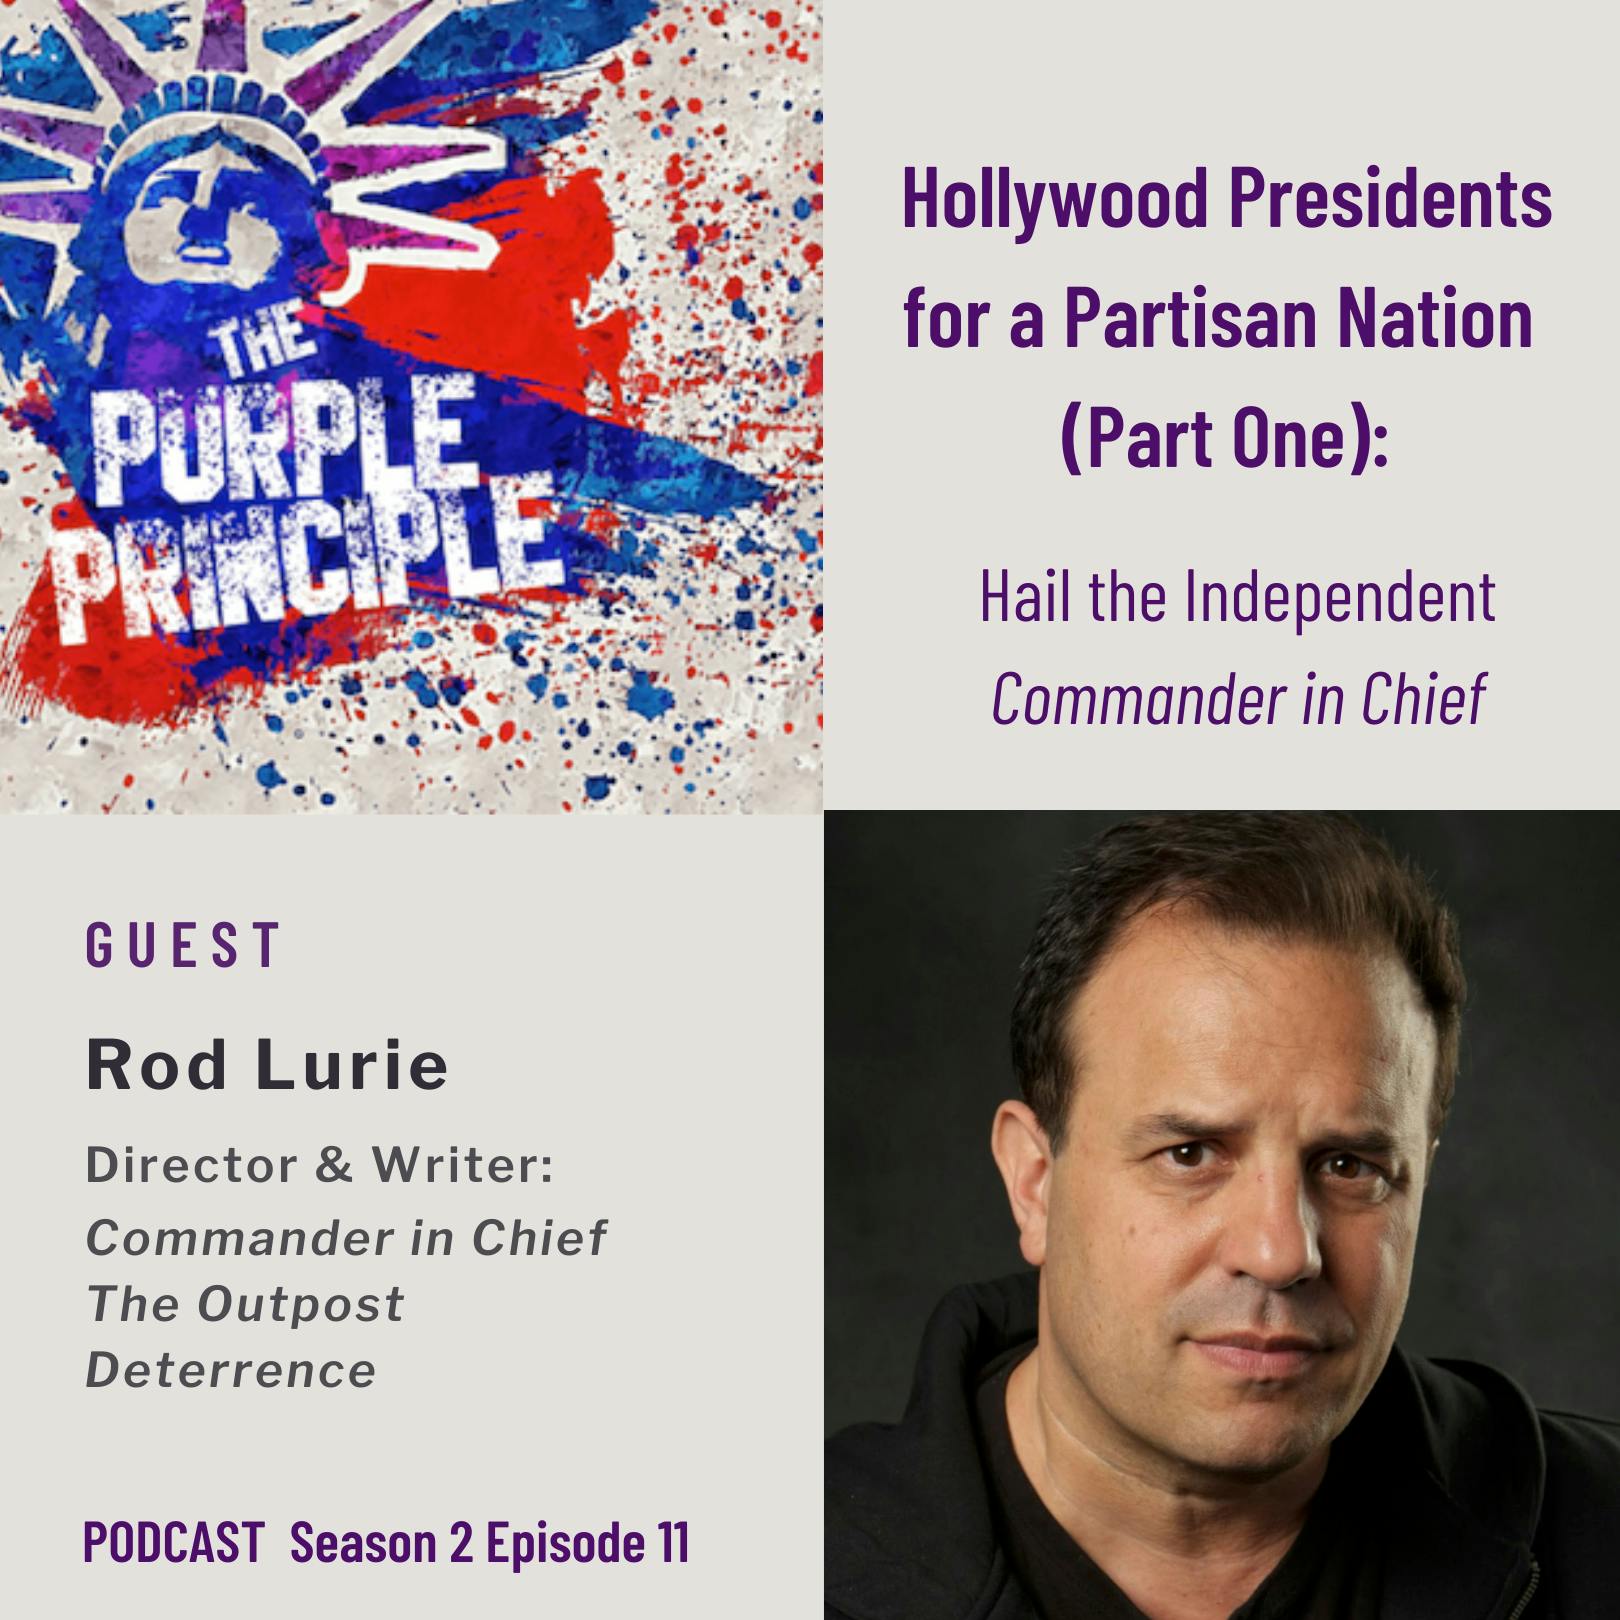 Hollywood Presidents for a Partisan Nation (Part One): Hail the Independent Commander in Chief